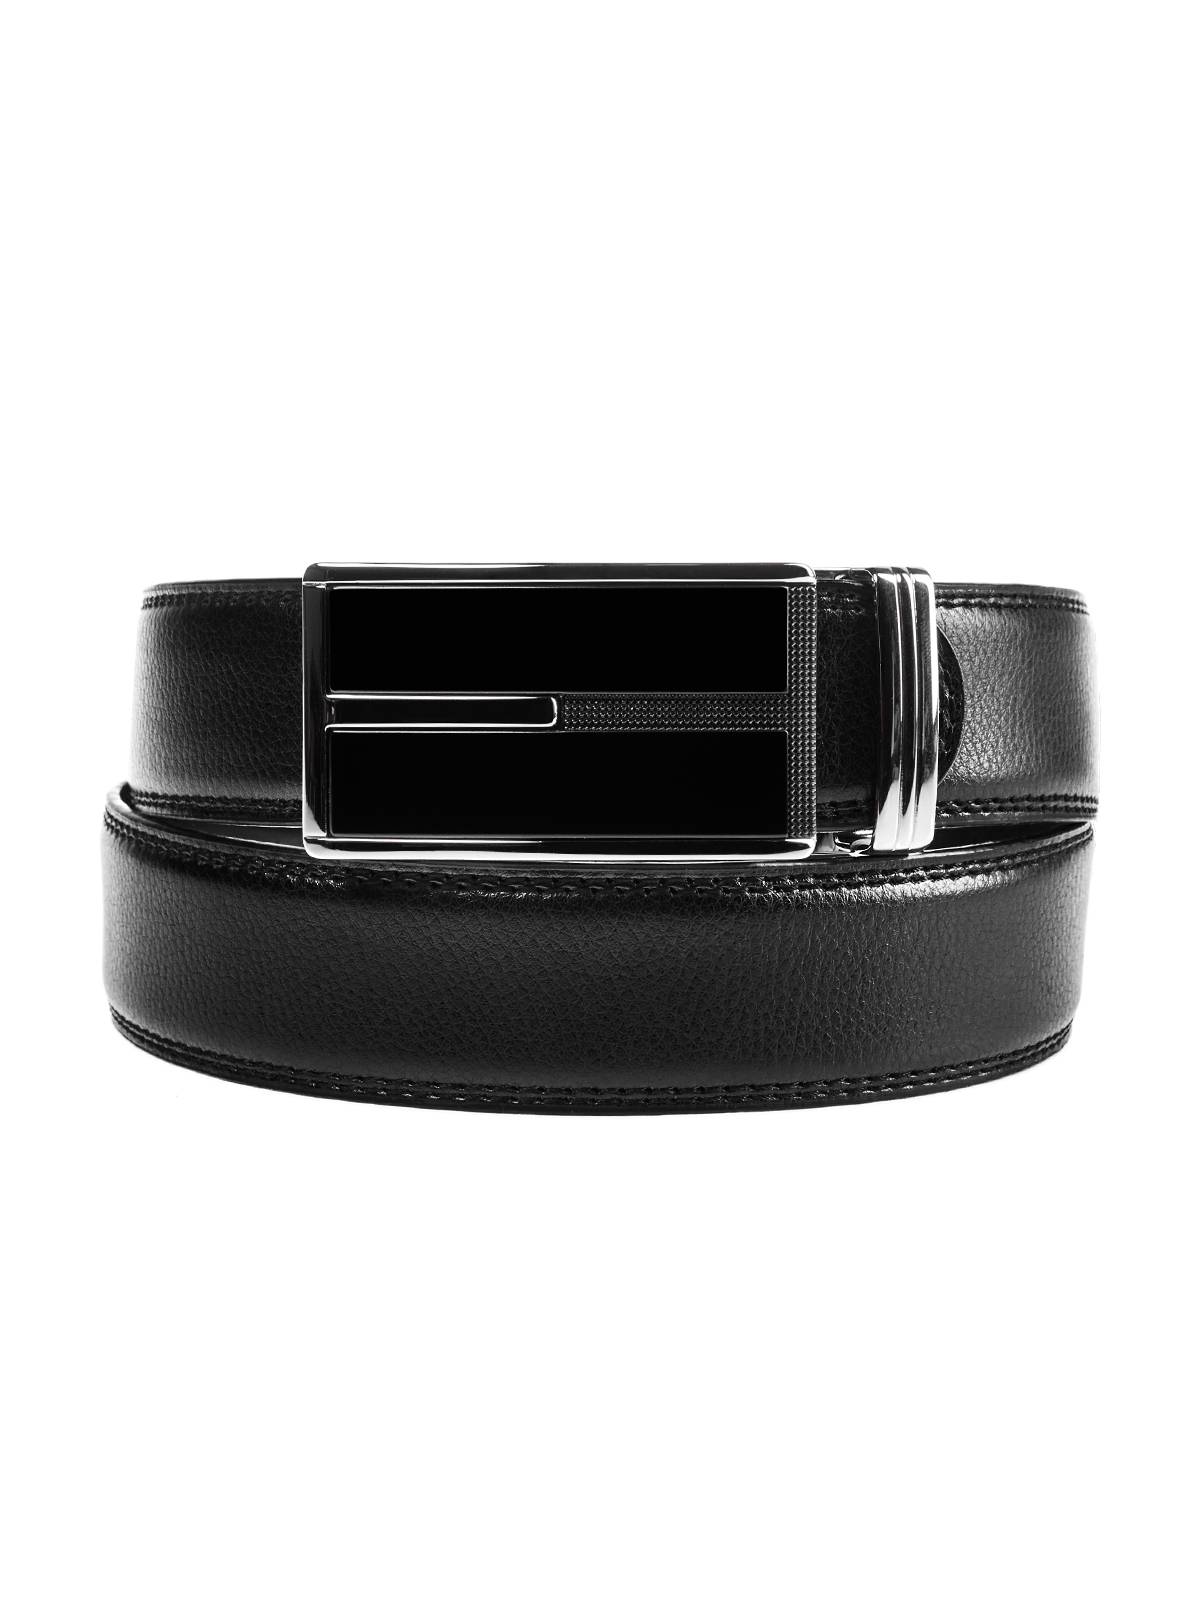 Luxury Men’s Leather Dress Belt With Sliding Ratchet Automatic Silver Buckle Hot